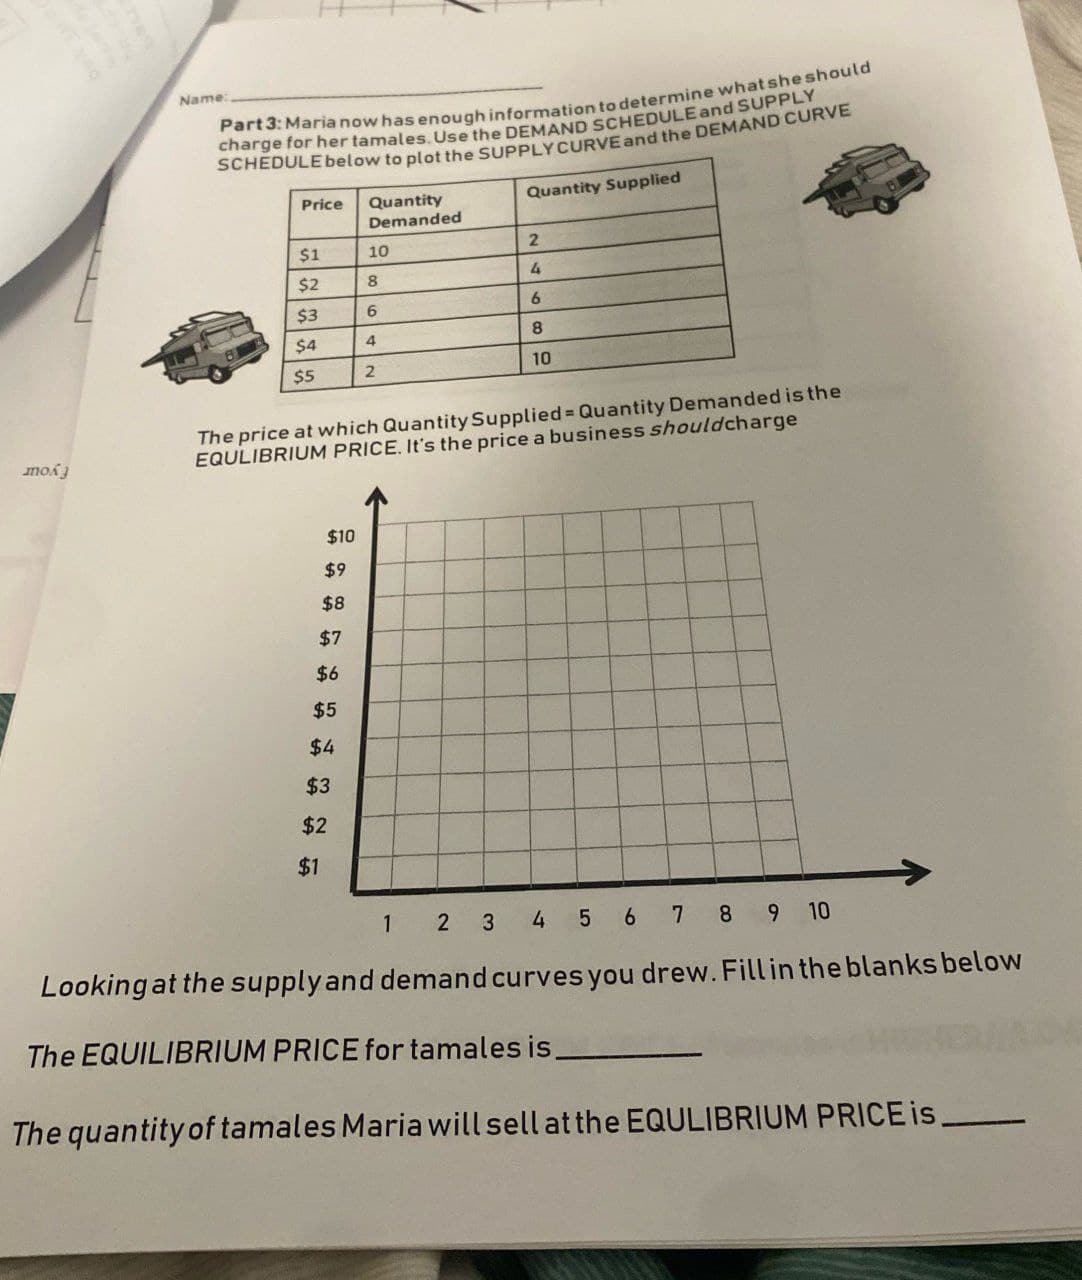 Name:
Part 3: Maria now has enough information to determine what she should
charge for her tamales. Use the DEMAND SCHEDULE and SUPPLY
SCHEDULE below to plot the SUPPLY CURVE and the DEMAND CURVE
Price
Quantity
Quantity Supplied
Demanded
$1
2
10
4
$2
8
6
$3
6
8
$4
4
10
$5
2
ток
The price at which Quantity Supplied = Quantity Demanded is the
EQULIBRIUM PRICE. It's the price a business shouldcharge
$10
$9
$8
$7
$6
$5
$4
$3
$2
$1
1 2 3 4 5 6 7 8 9 10
Looking at the supply and demand curves you drew. Fill in the blanks below
The EQUILIBRIUM PRICE for tamales is.
The quantity of tamales Maria will sell at the EQULIBRIUM PRICE is.